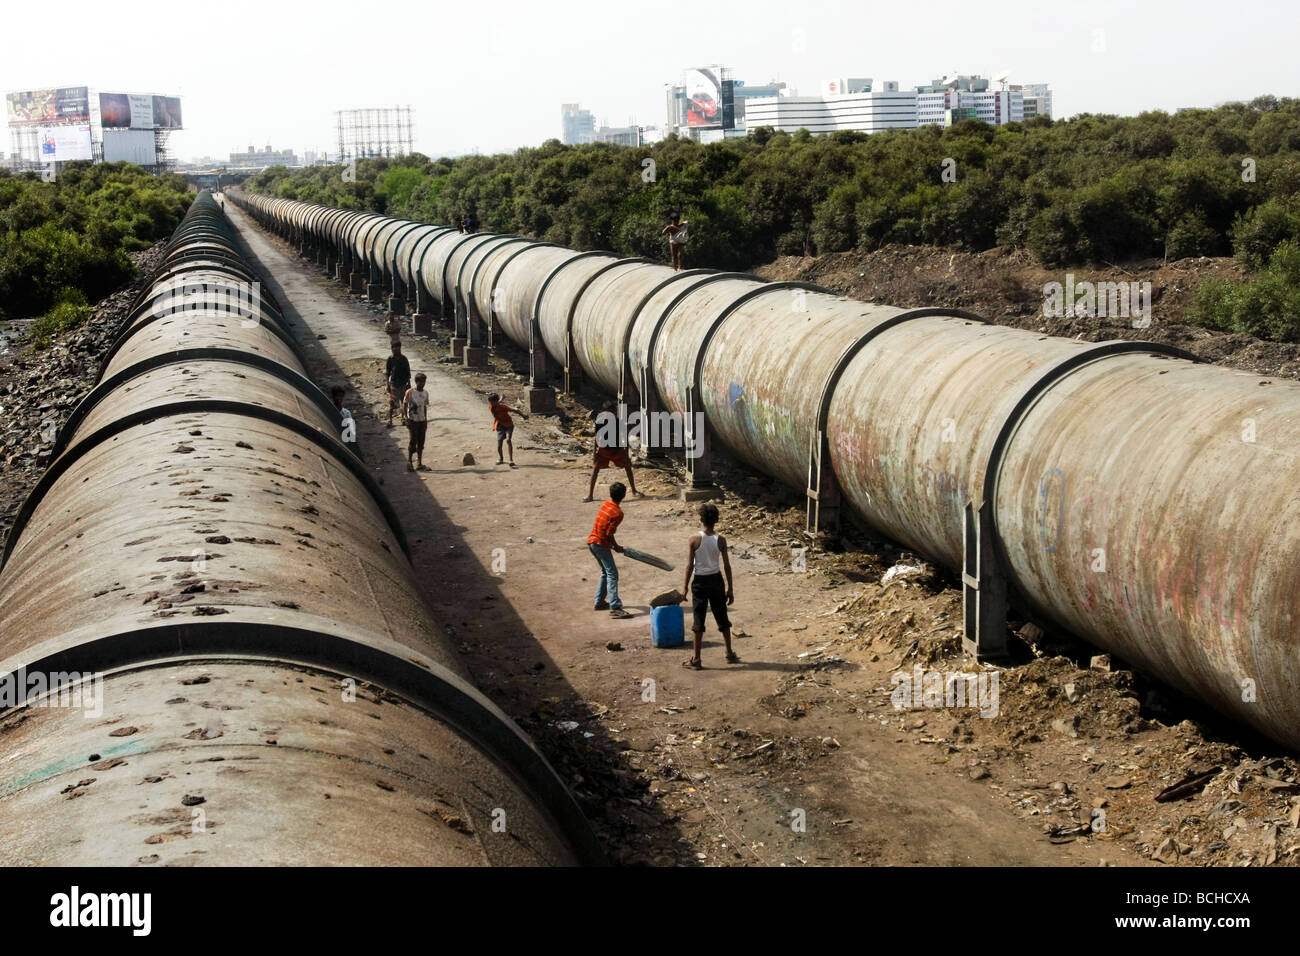 Children play cricket in between two large waterpipes that runs through Dharavi, the largest slum area in Mumbai (Bombay). Stock Photo